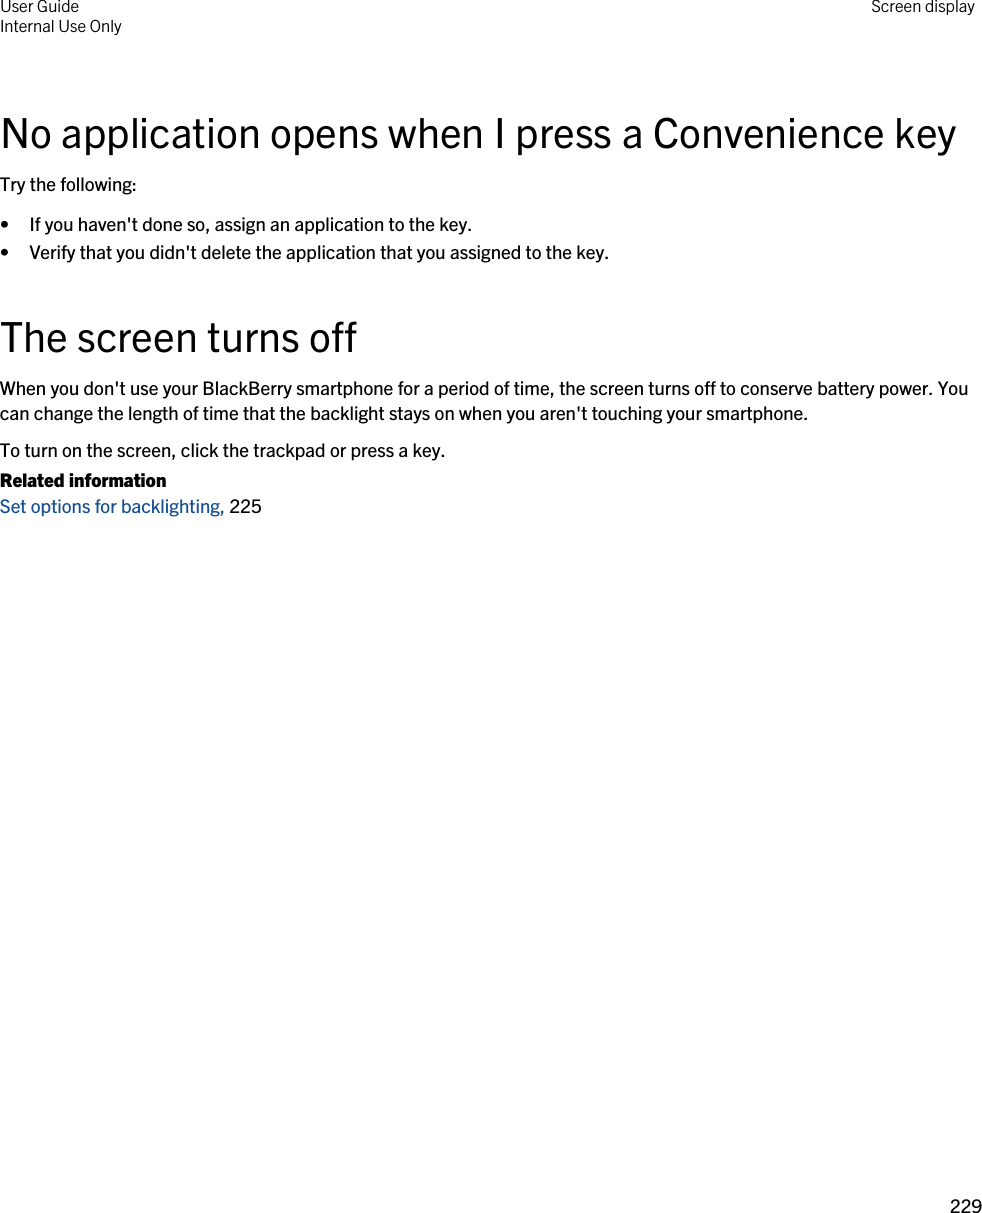 No application opens when I press a Convenience keyTry the following:• If you haven&apos;t done so, assign an application to the key.• Verify that you didn&apos;t delete the application that you assigned to the key.The screen turns offWhen you don&apos;t use your BlackBerry smartphone for a period of time, the screen turns off to conserve battery power. You can change the length of time that the backlight stays on when you aren&apos;t touching your smartphone.To turn on the screen, click the trackpad or press a key.Related informationSet options for backlighting, 225 User GuideInternal Use Only Screen display229 